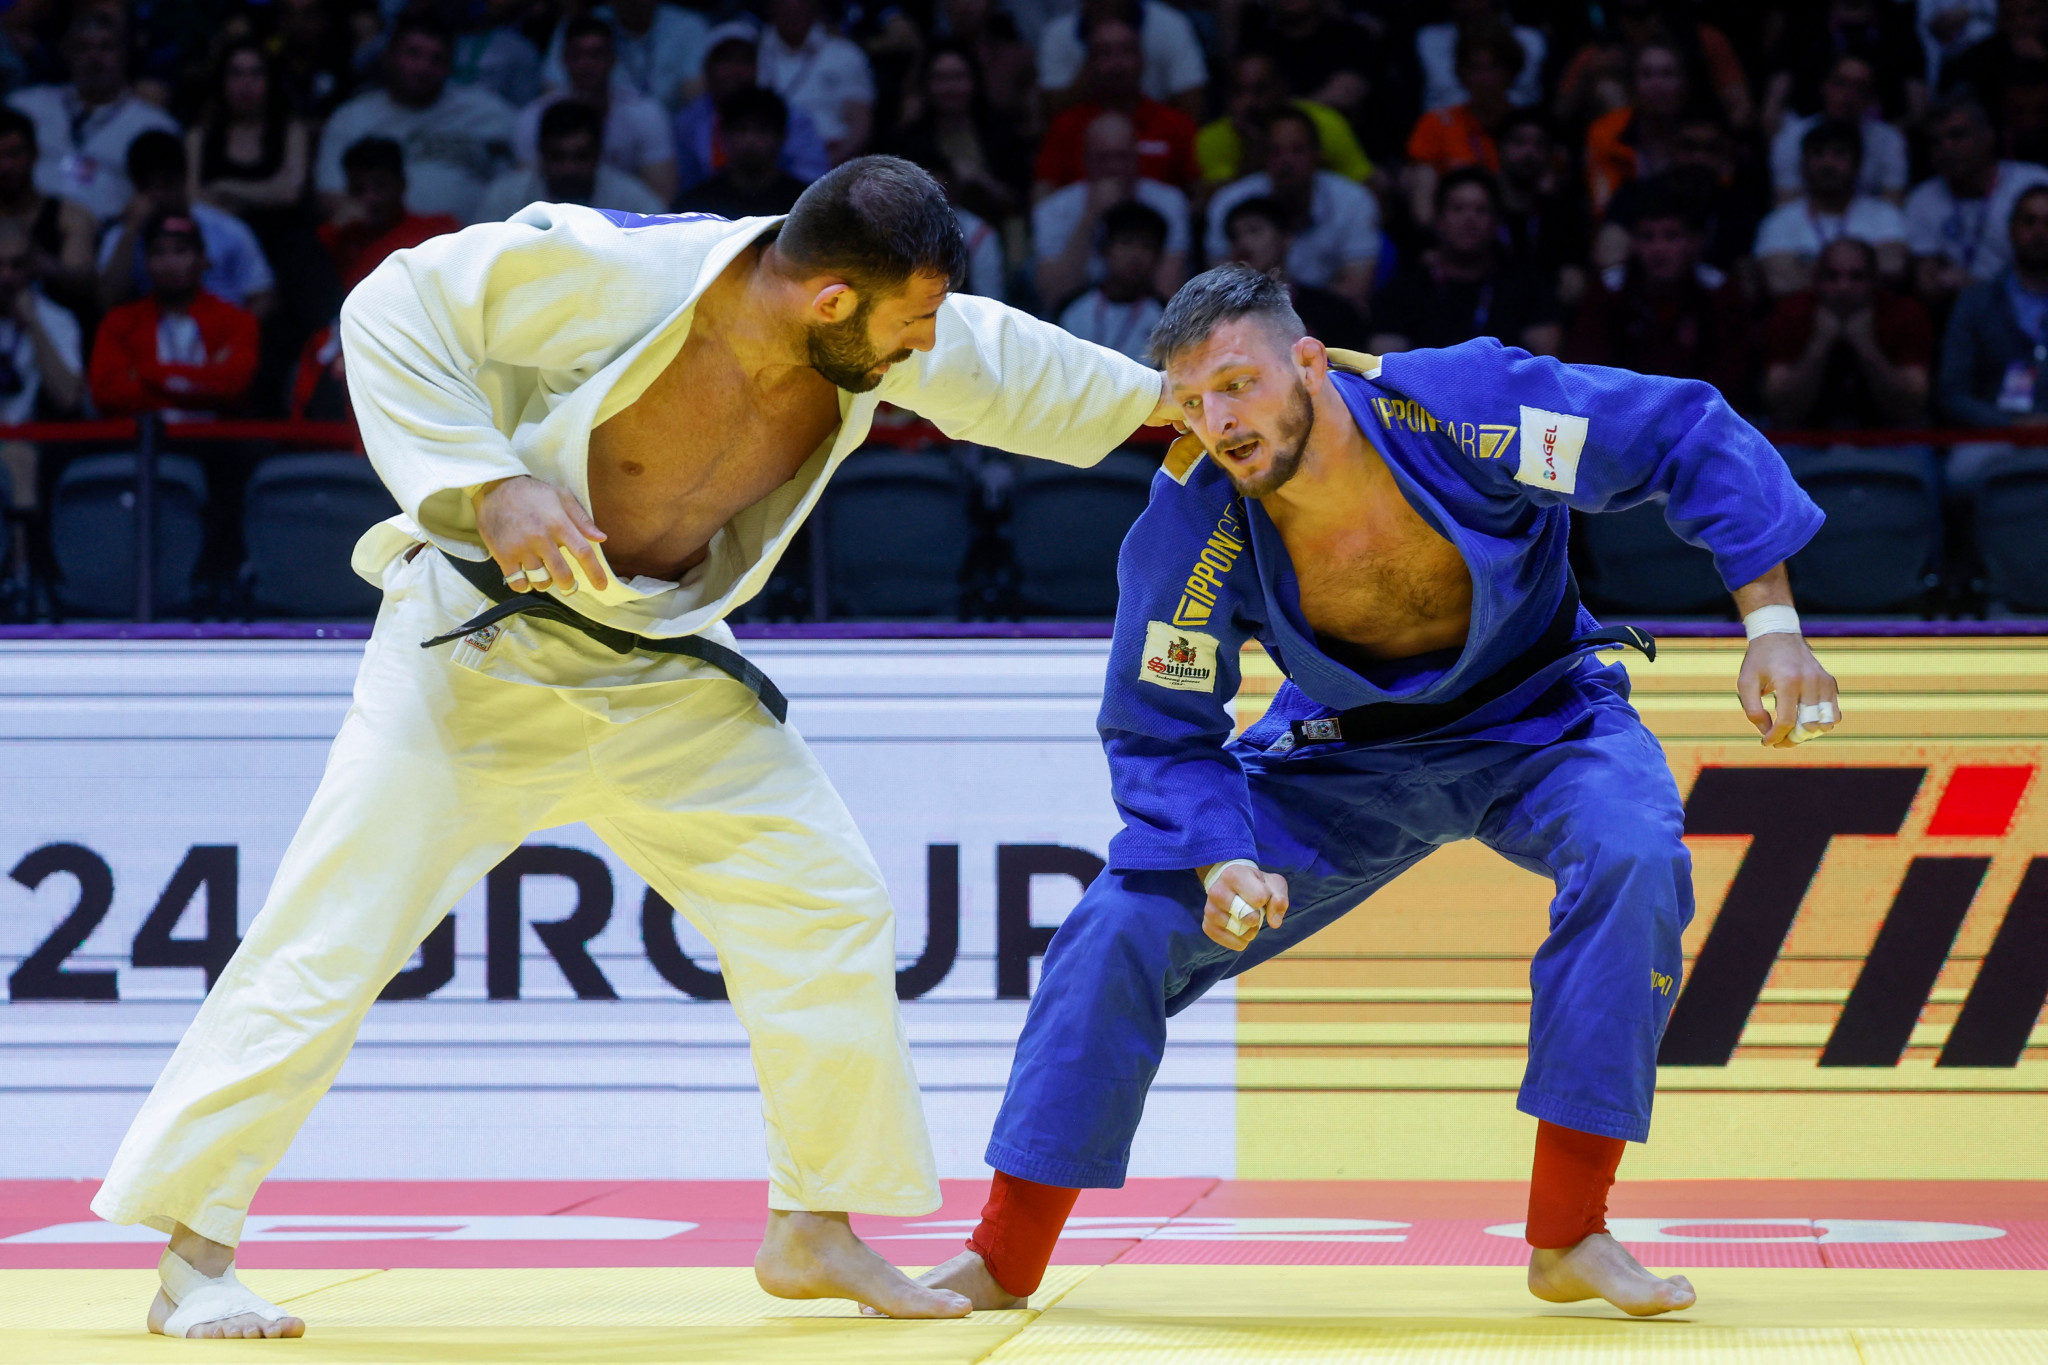 Lukas Krpalek (blue) competes with Russia's Arman Adamian in the men's -100Kg final bout at the 2023 World Judo Championship in Doha © KARIM JAAFAR/AFP via Getty Images